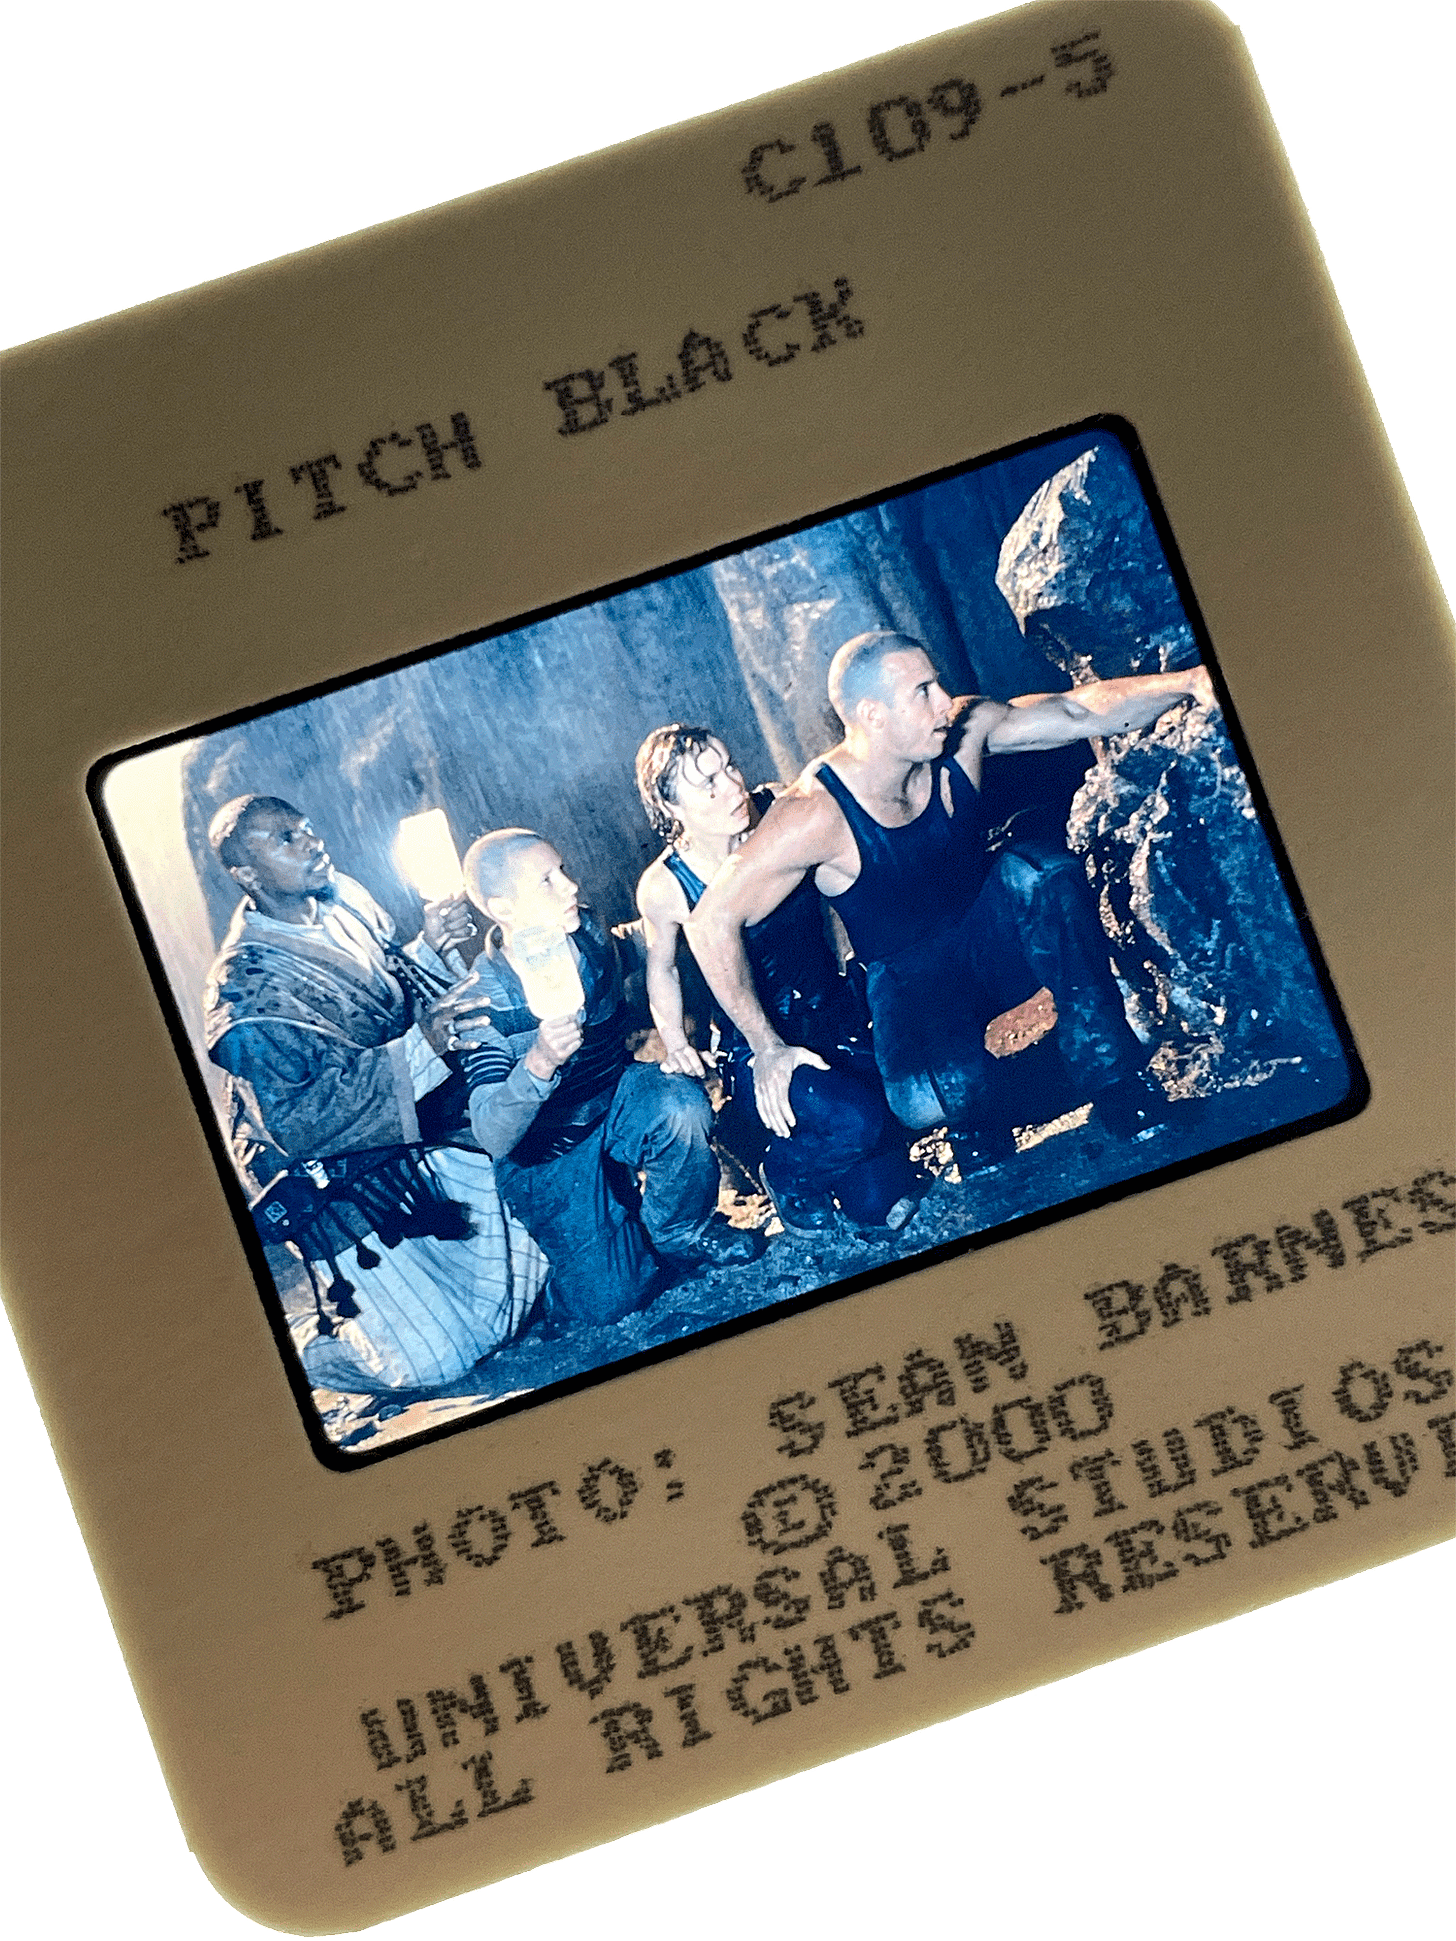 A slide from PITCH BLACK showing Vin Diesel, Radha Mitchell, and others crouching in the dark. Photo by Sean Barnes.